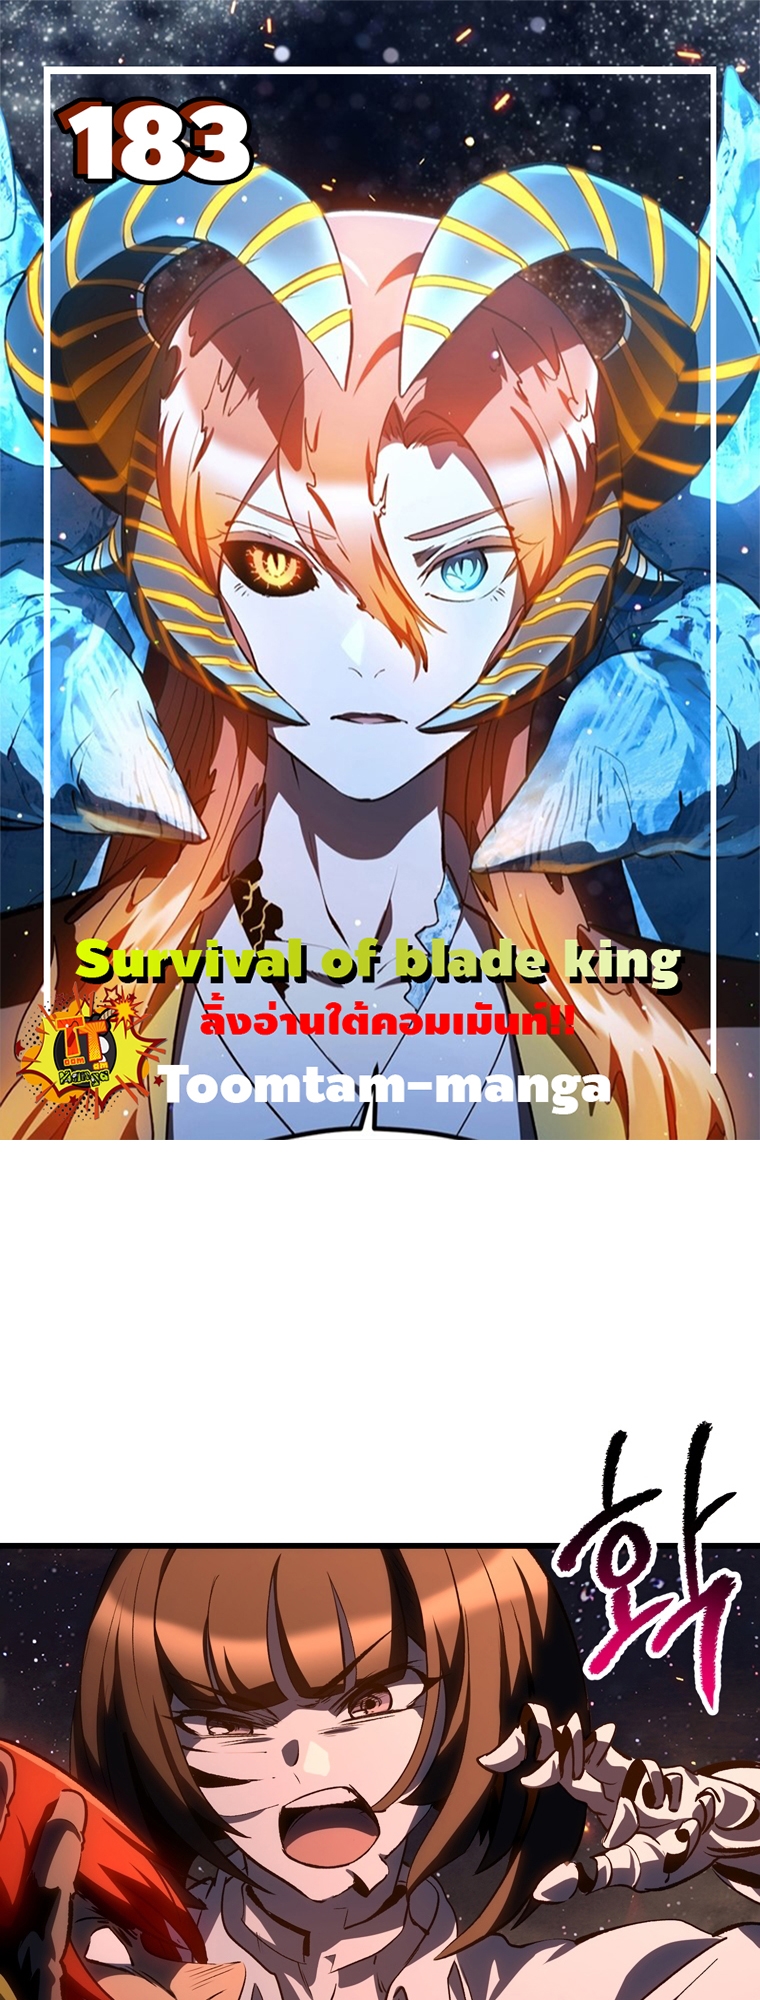 Survival of blade king 183 08 09 660001